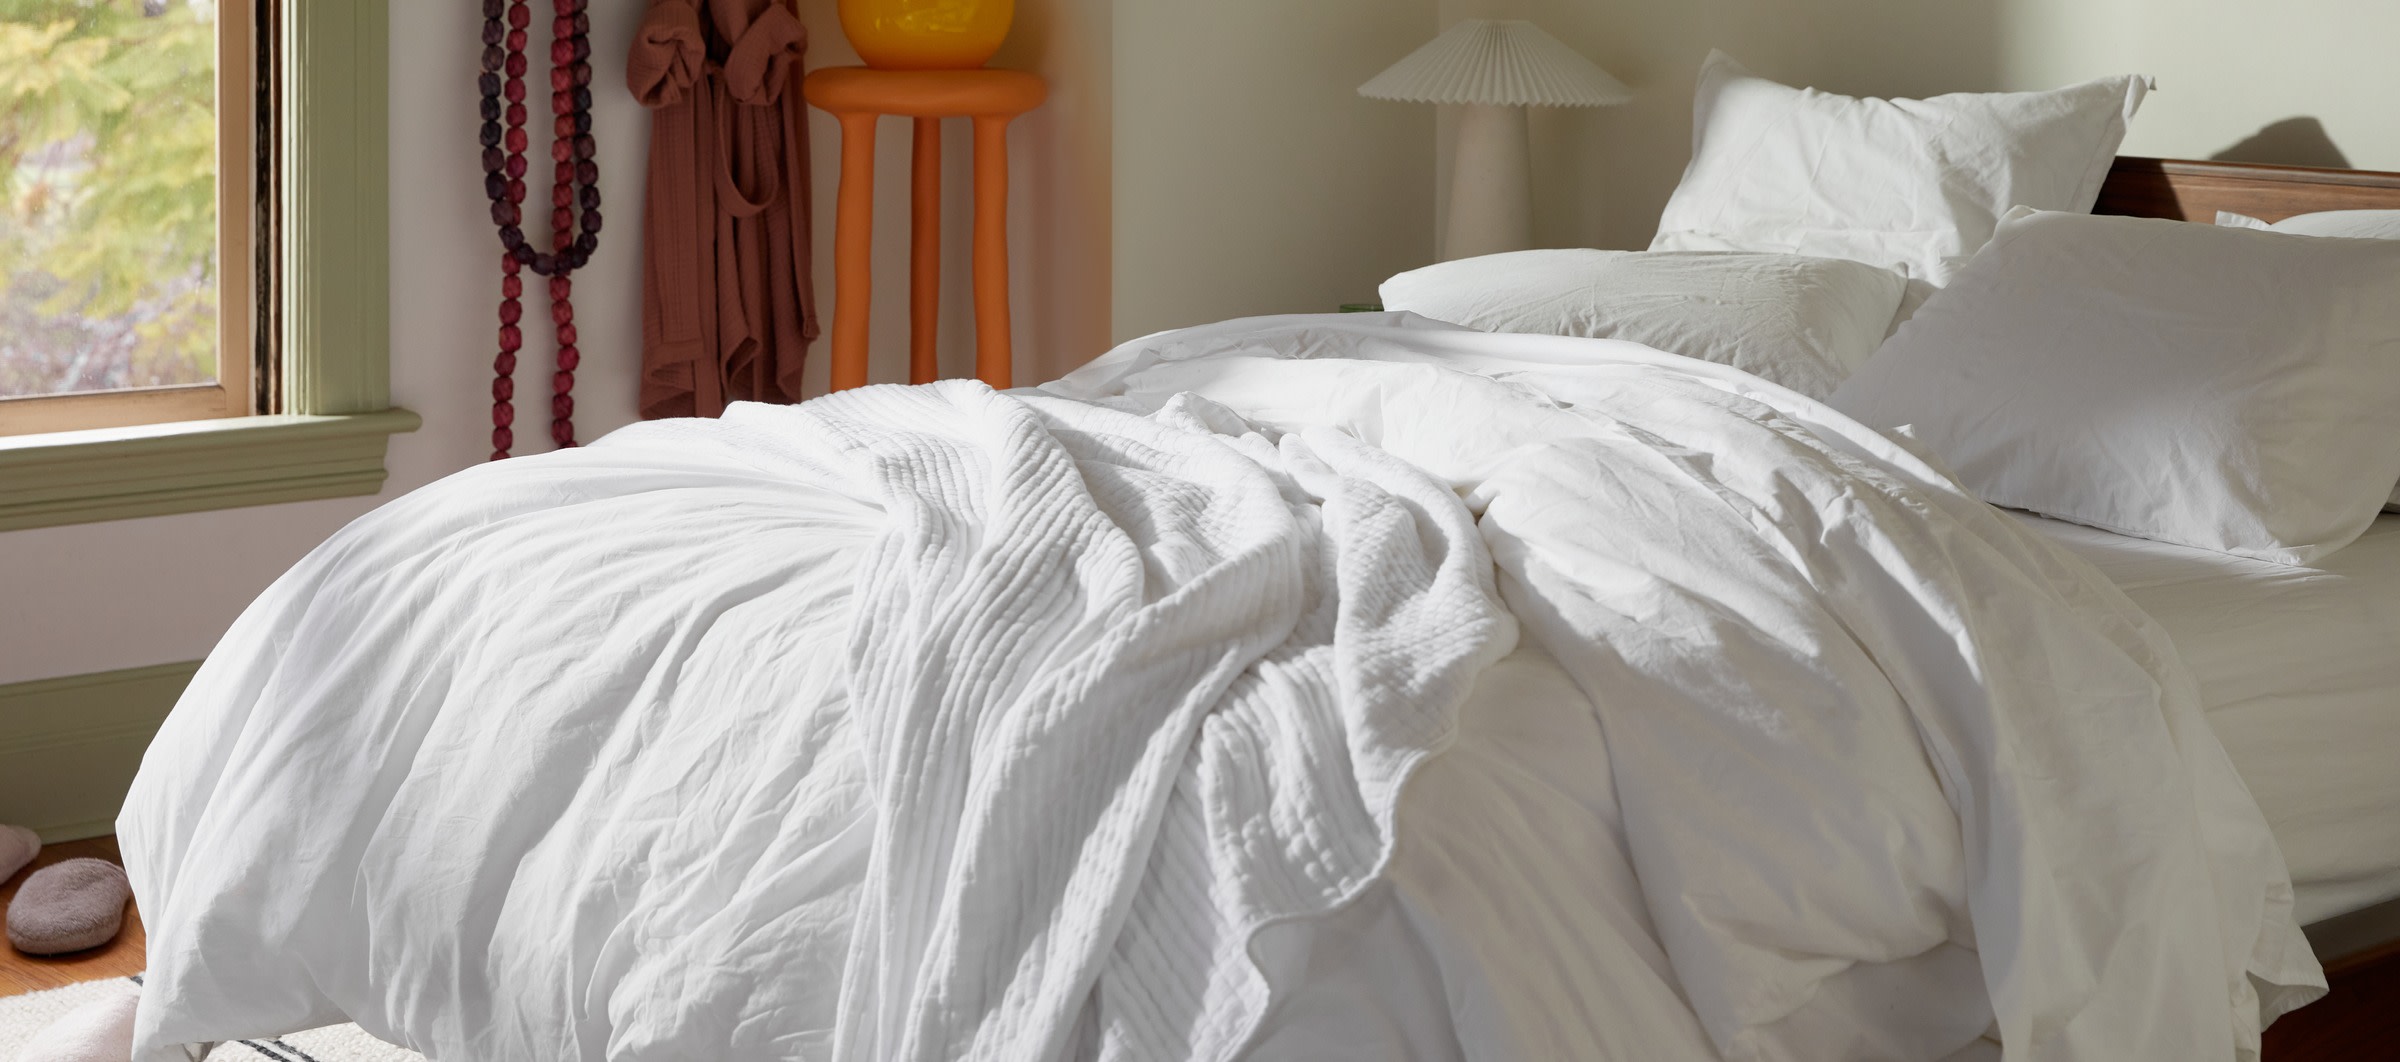 A messy bed with white cotton percale sheets in a room filled with bright, eclectic decor